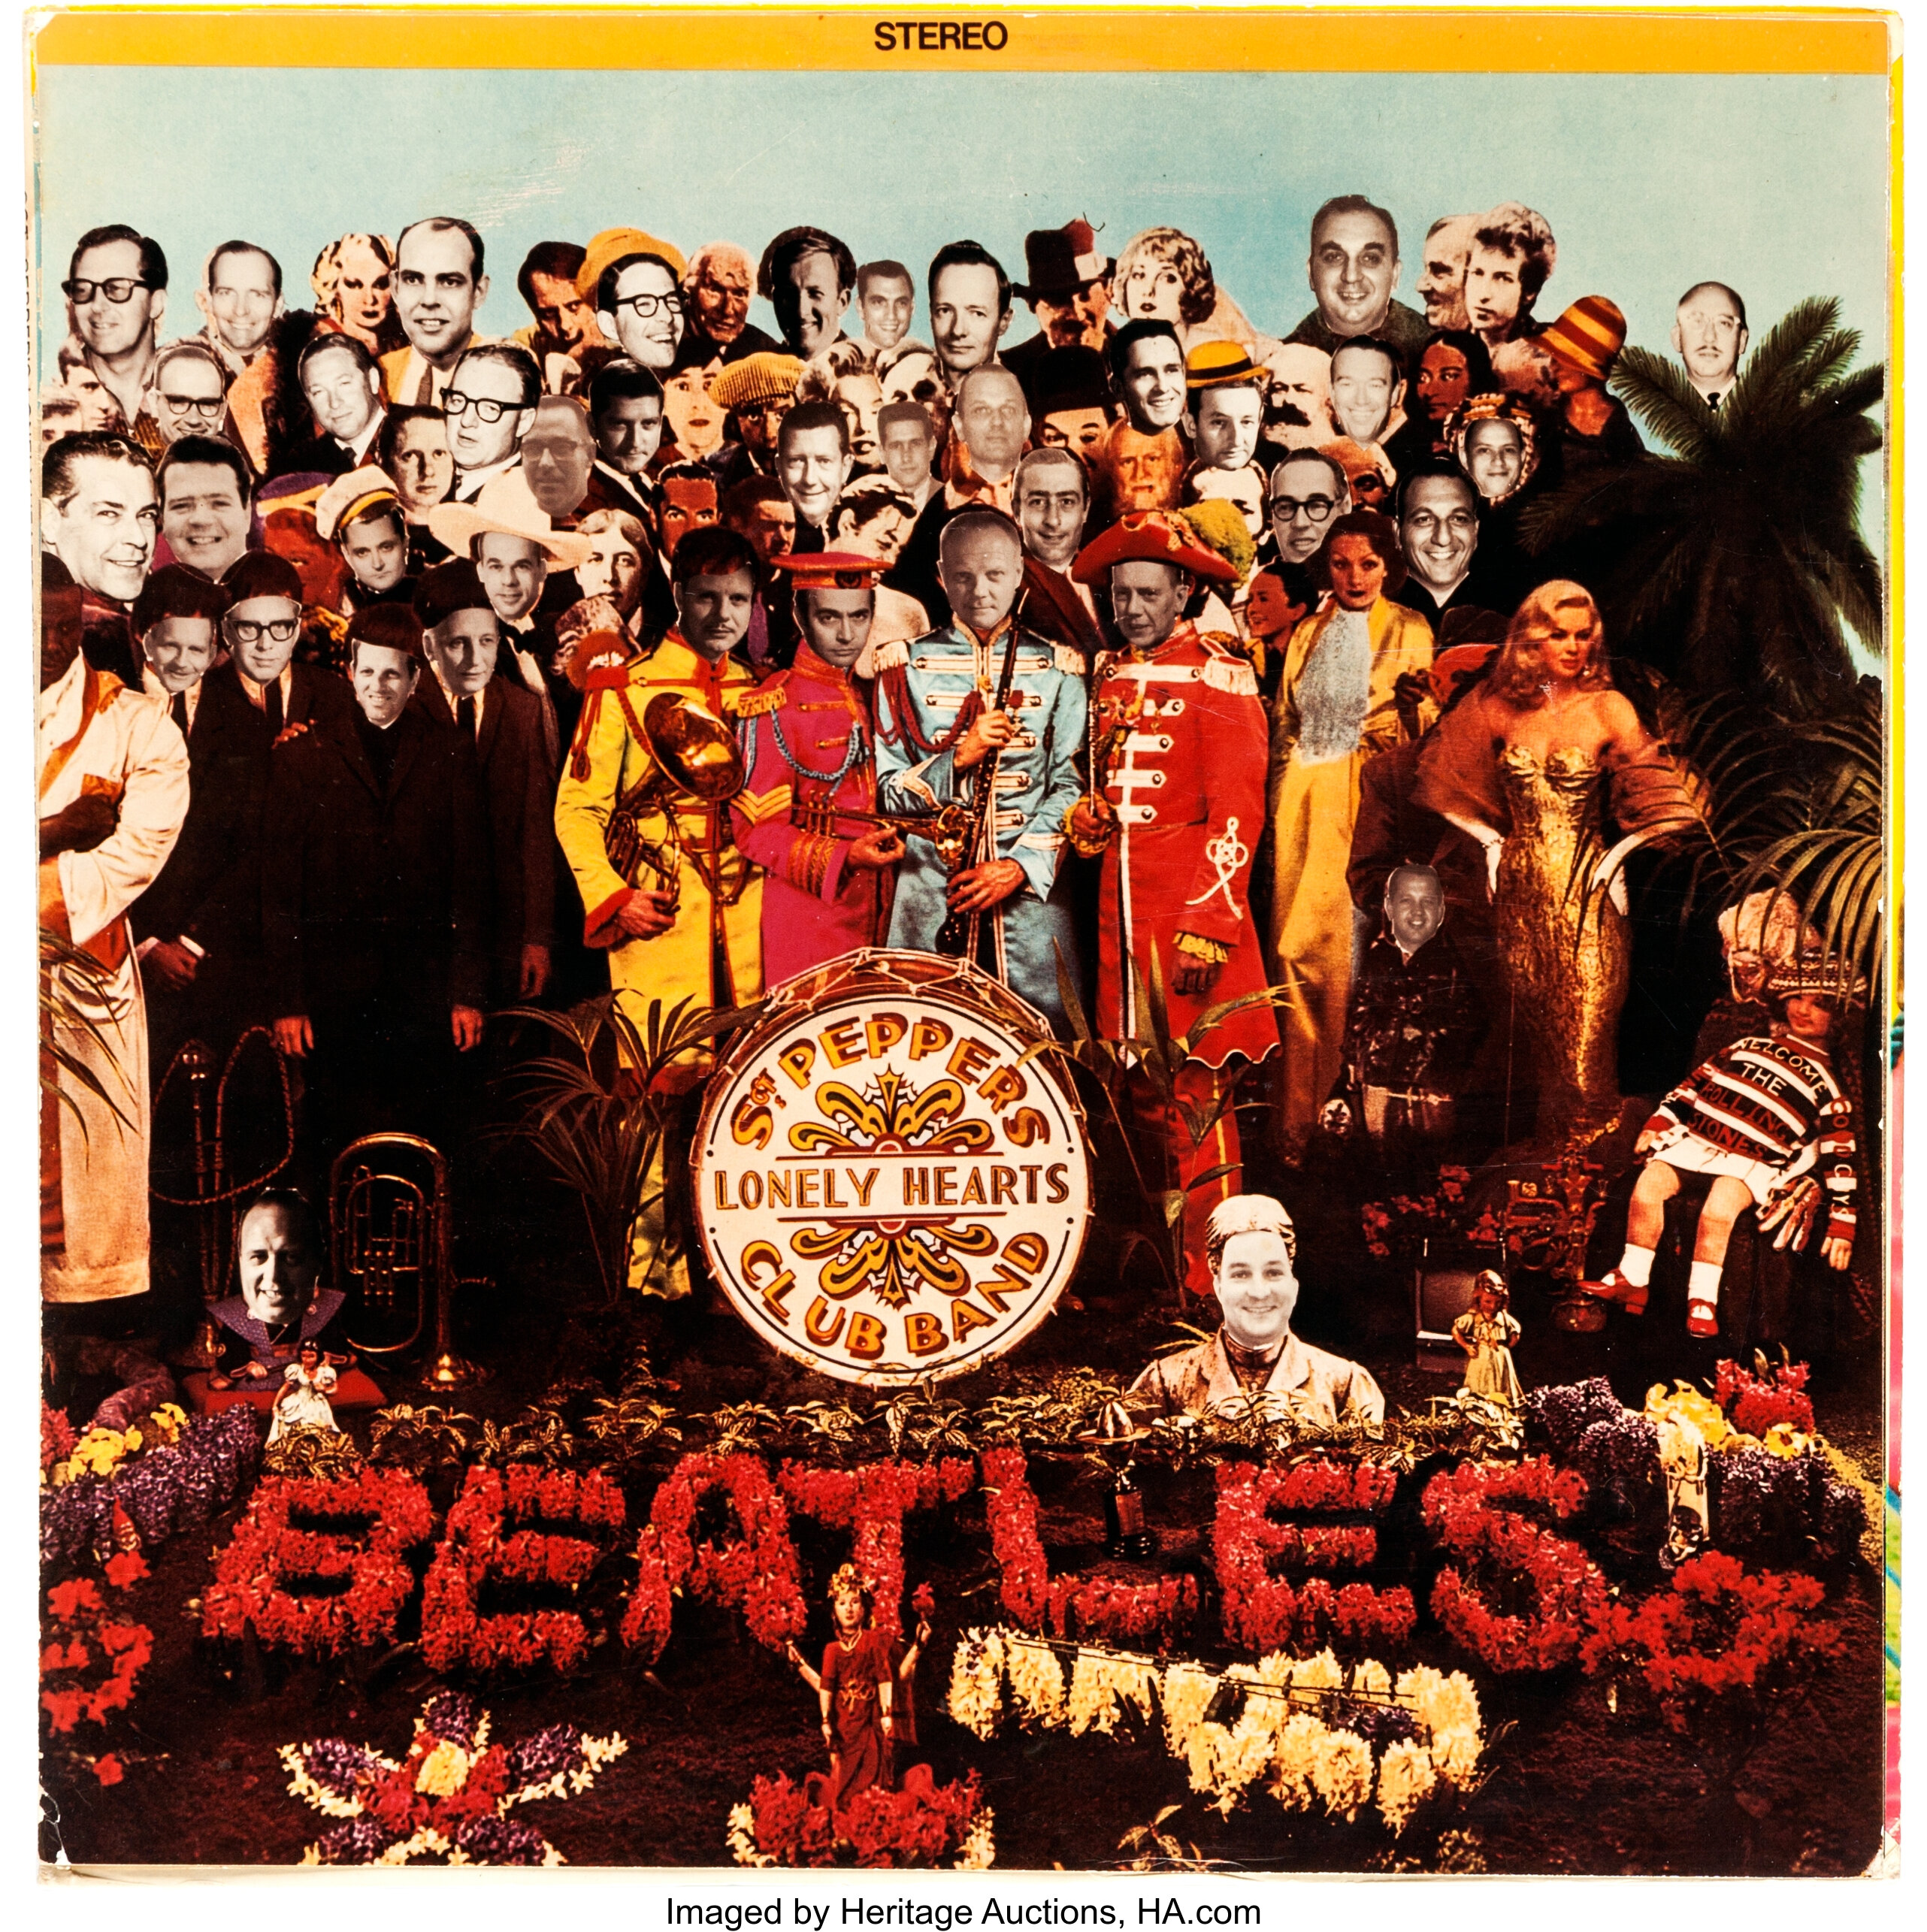 Pochette Sgt Peppers Lonely Hearts Club Band Pochette Sgt Pepper's Lonely Hearts Club Band | AUTOMASITES